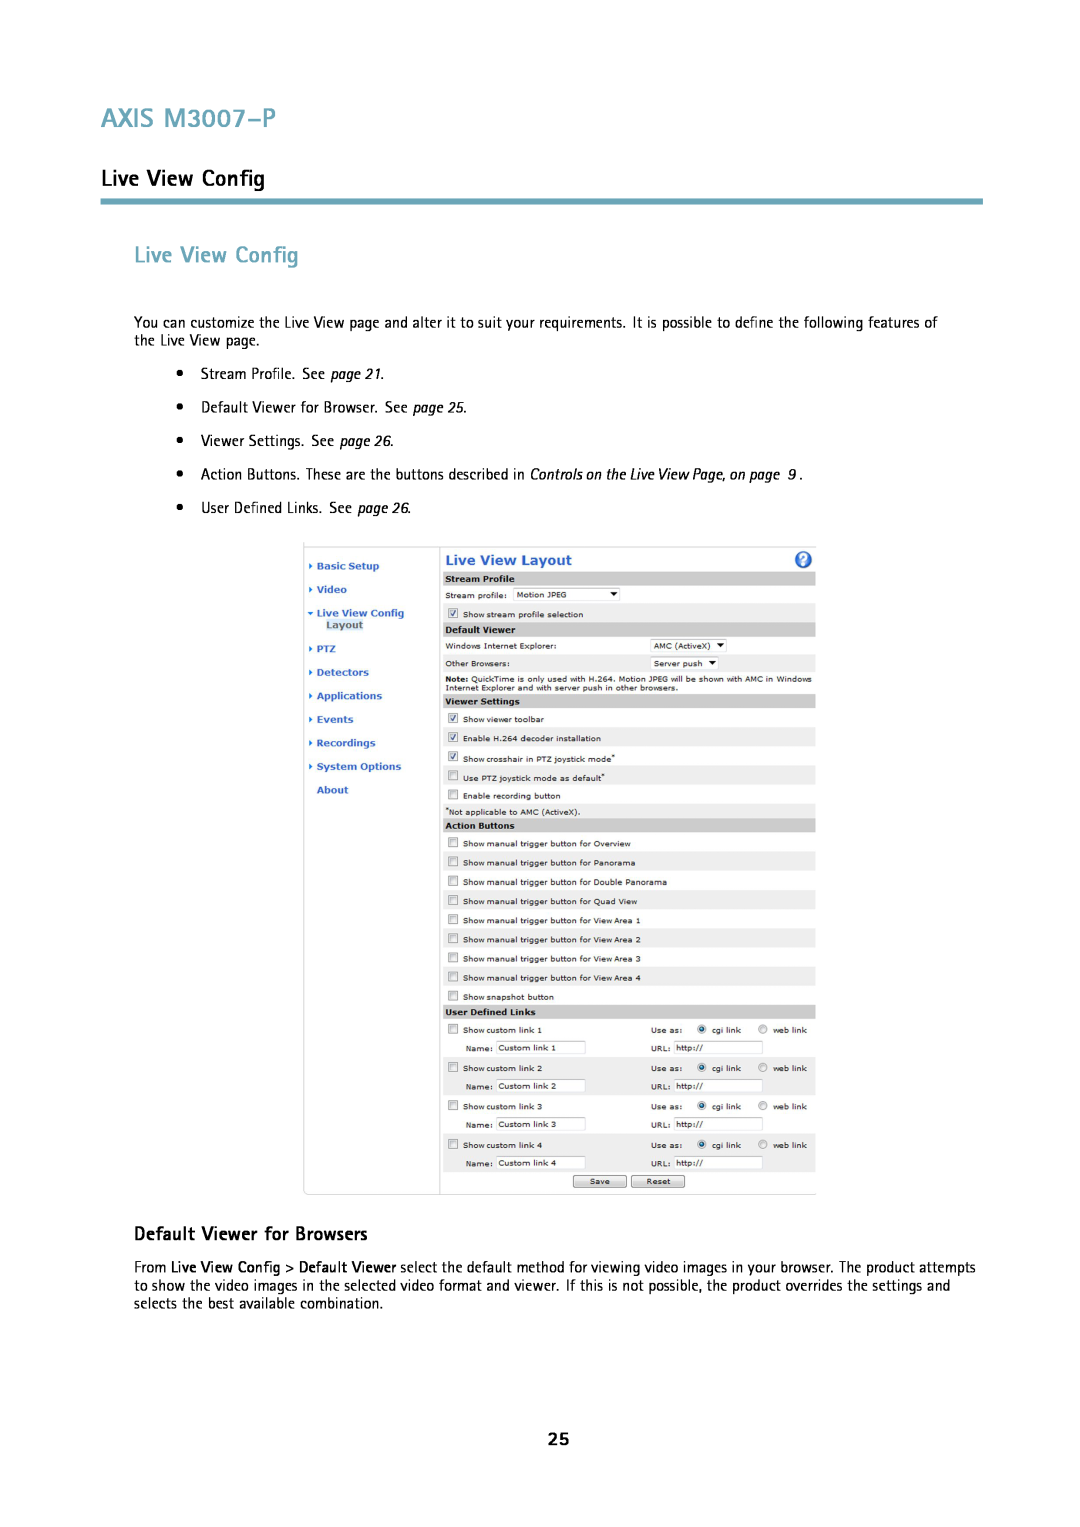 Axis Communications user manual Live View Config, Default Viewer for Browsers, AXIS M3007-P 